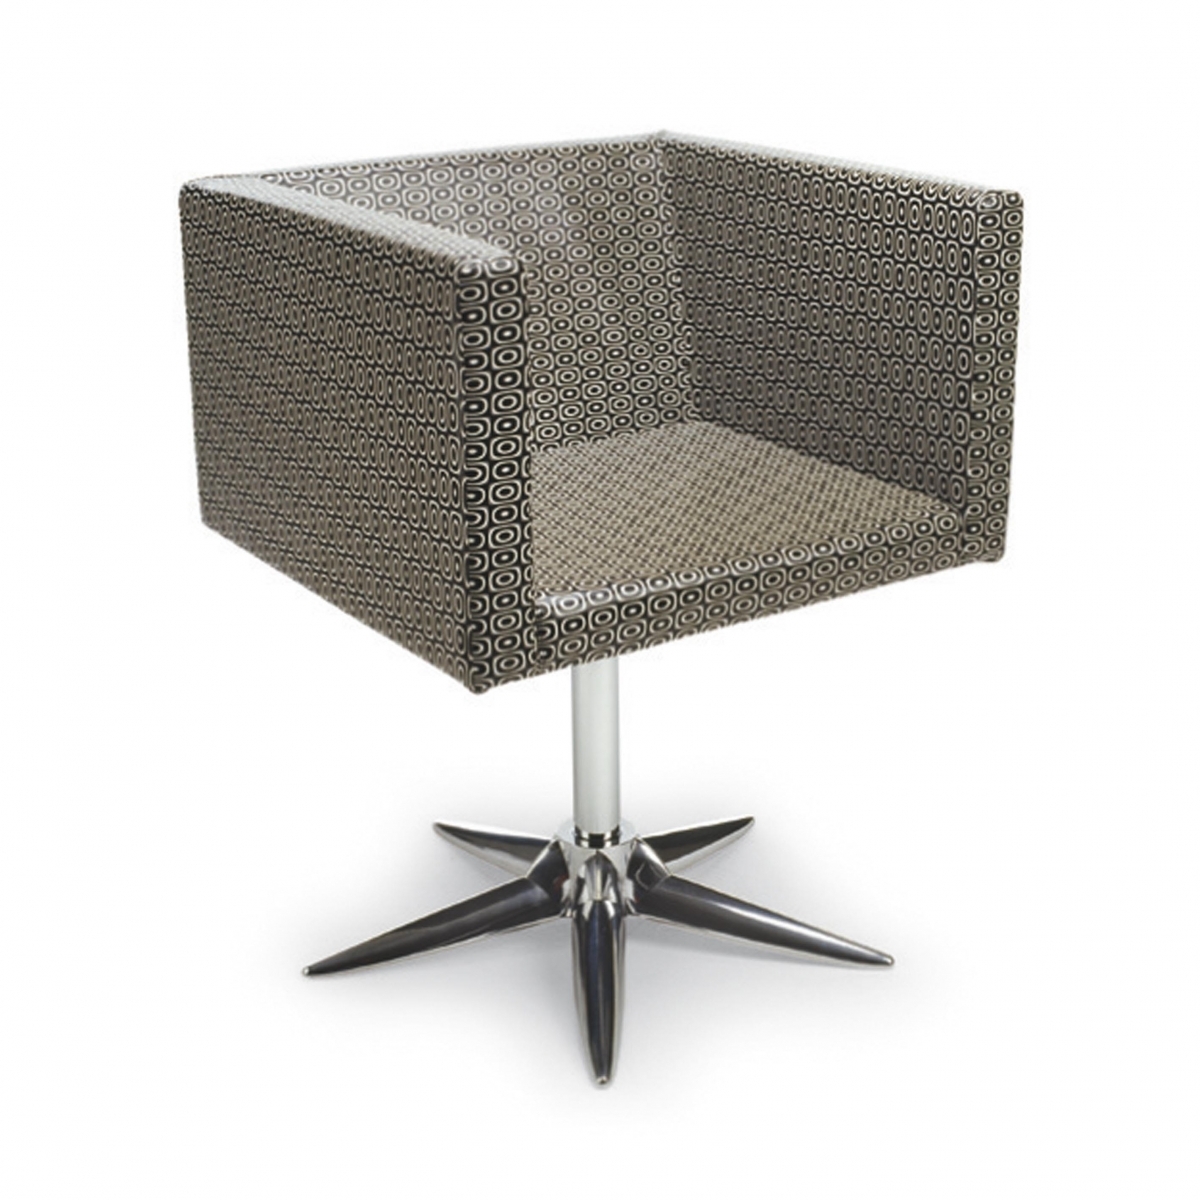 Kubika Parrot Styling Chair by Gamma & Bross Spa